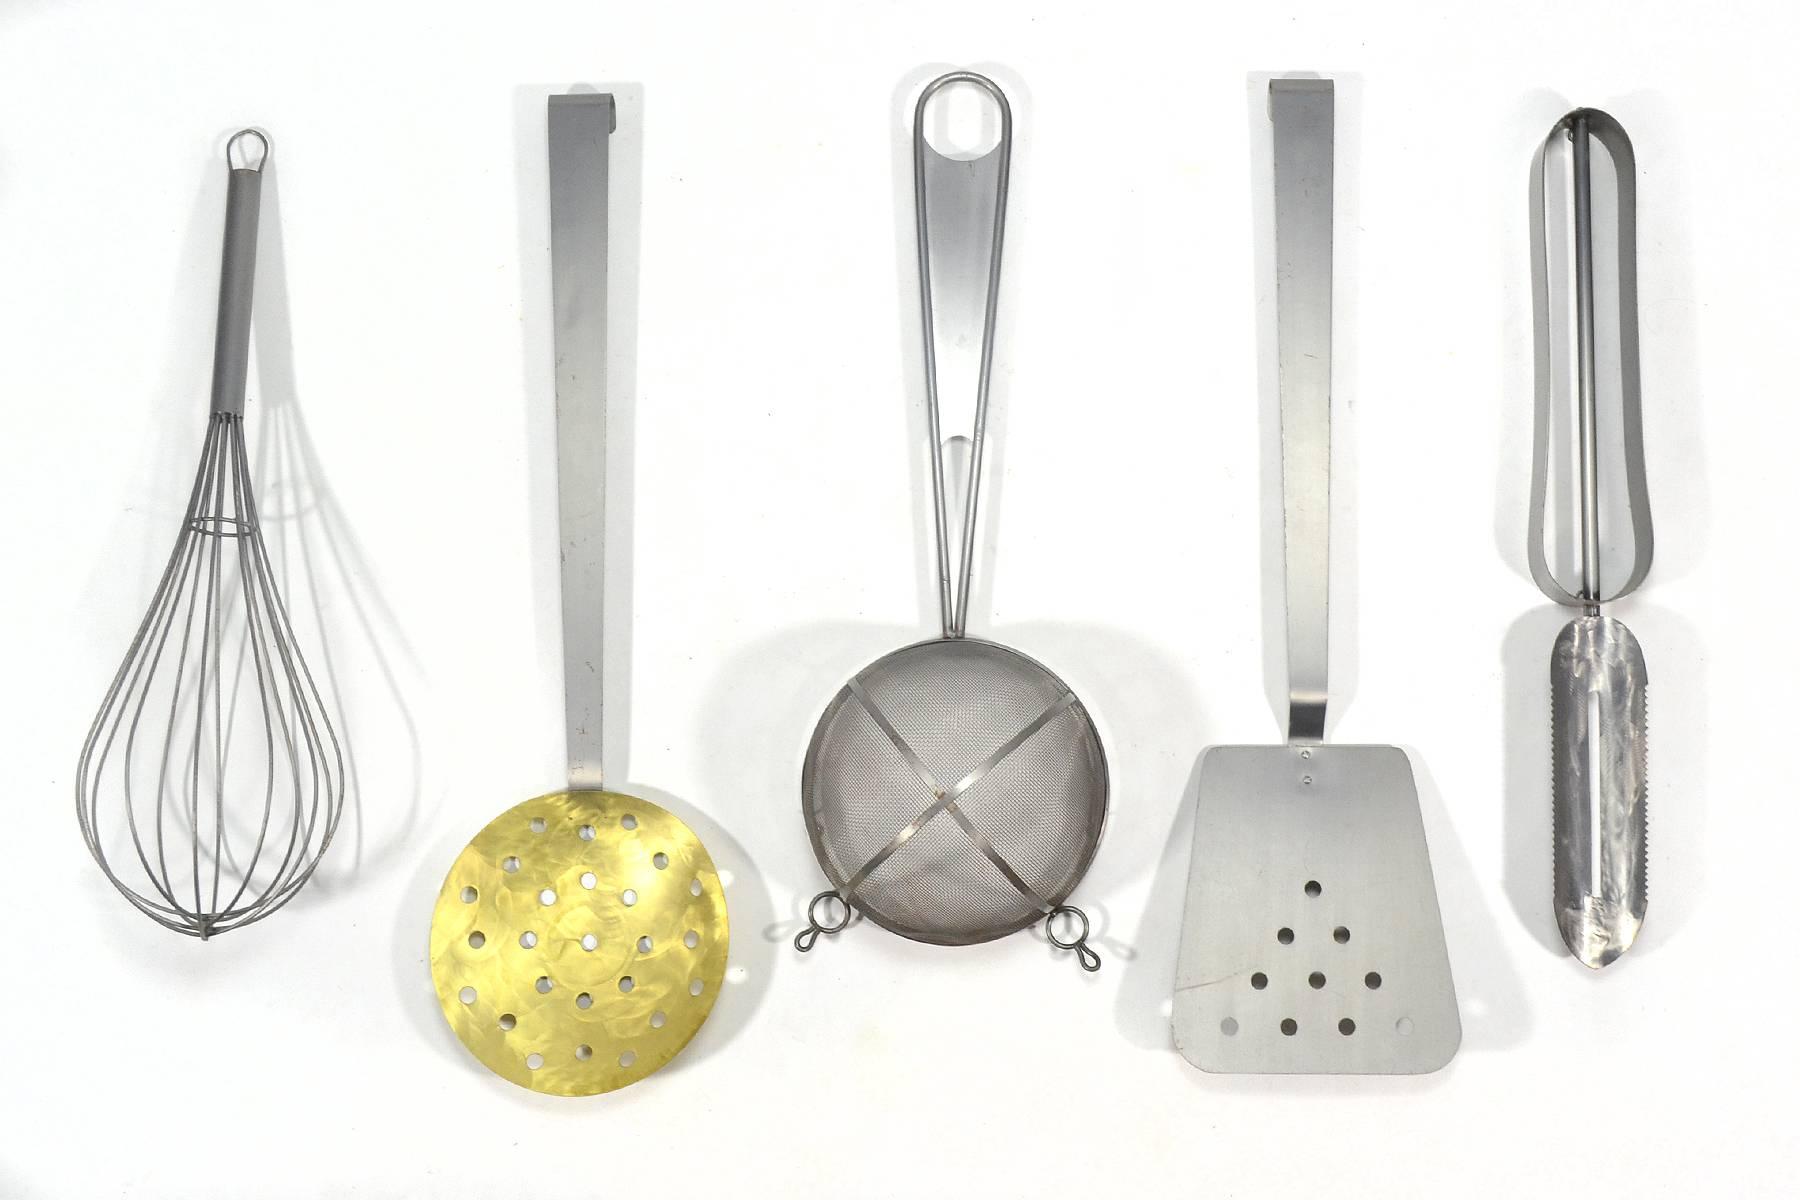 This delightfully playful set of giant cooking utensil sculptures by Curtis Jere' is uncommon for its number of pieces. It includes a peeler, a spatula, a colander, a strainer and a great big whisk. They are large and dramatic making a powerful